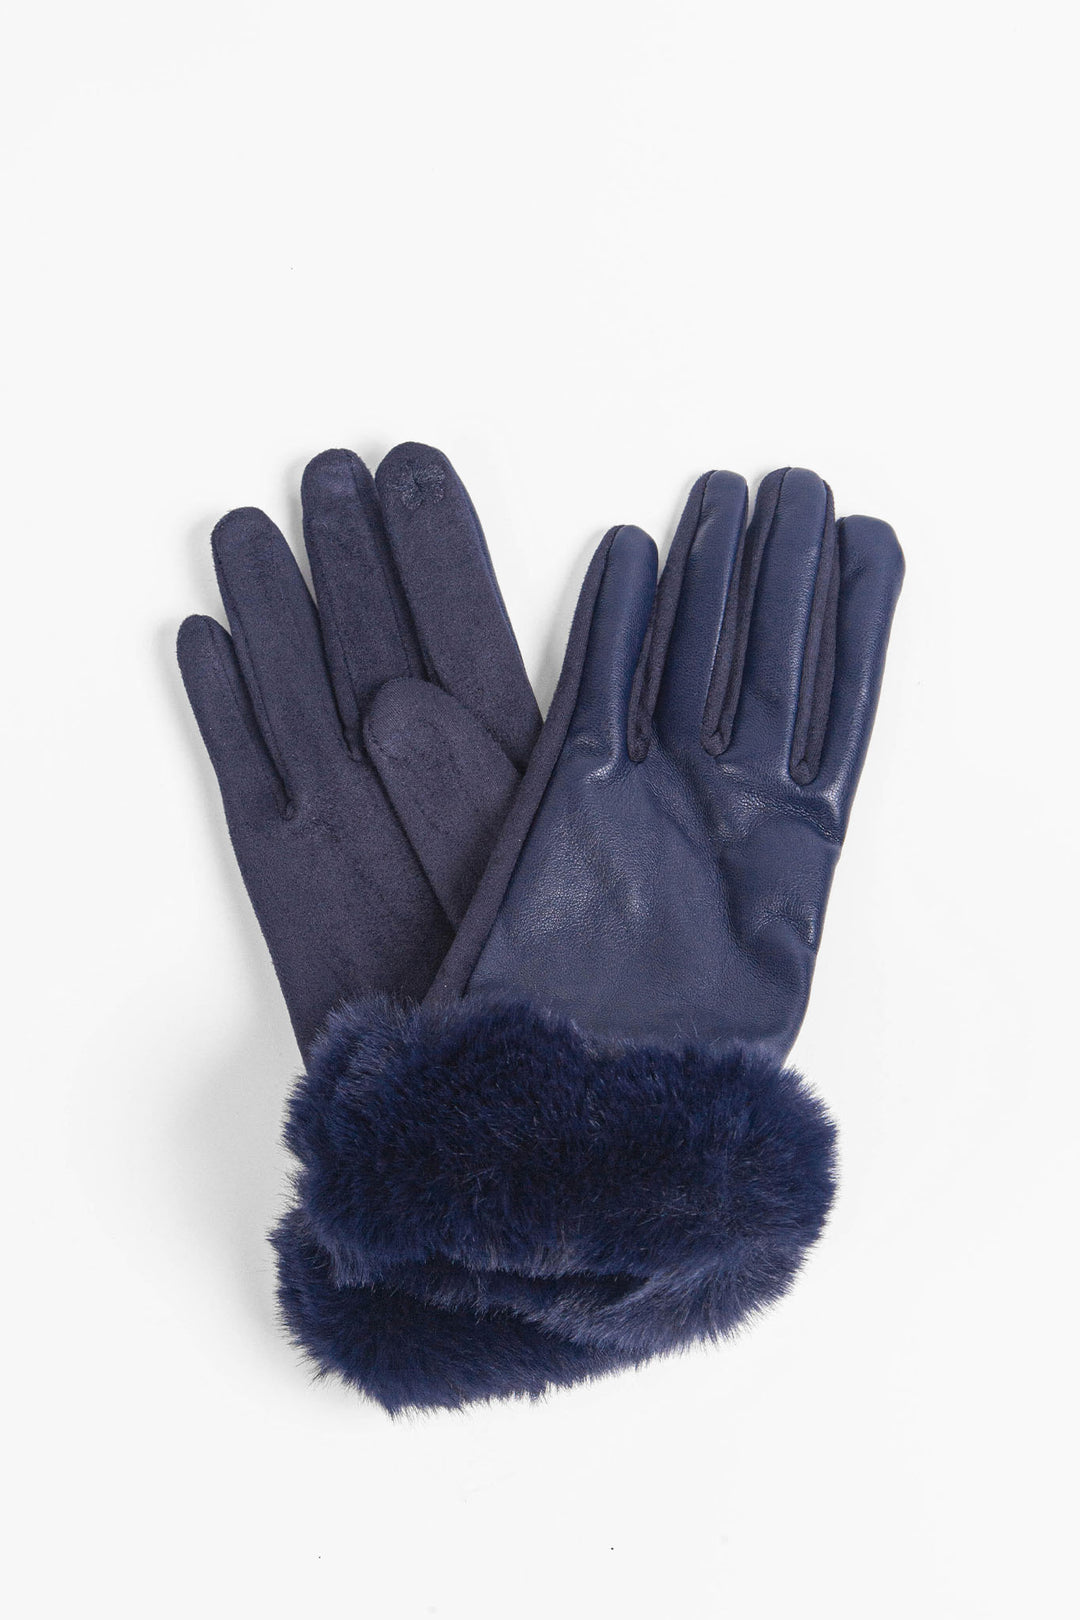 navy blue faux leather gloves with a faux fur trim around the wrist. the gloves are touch screen compatible